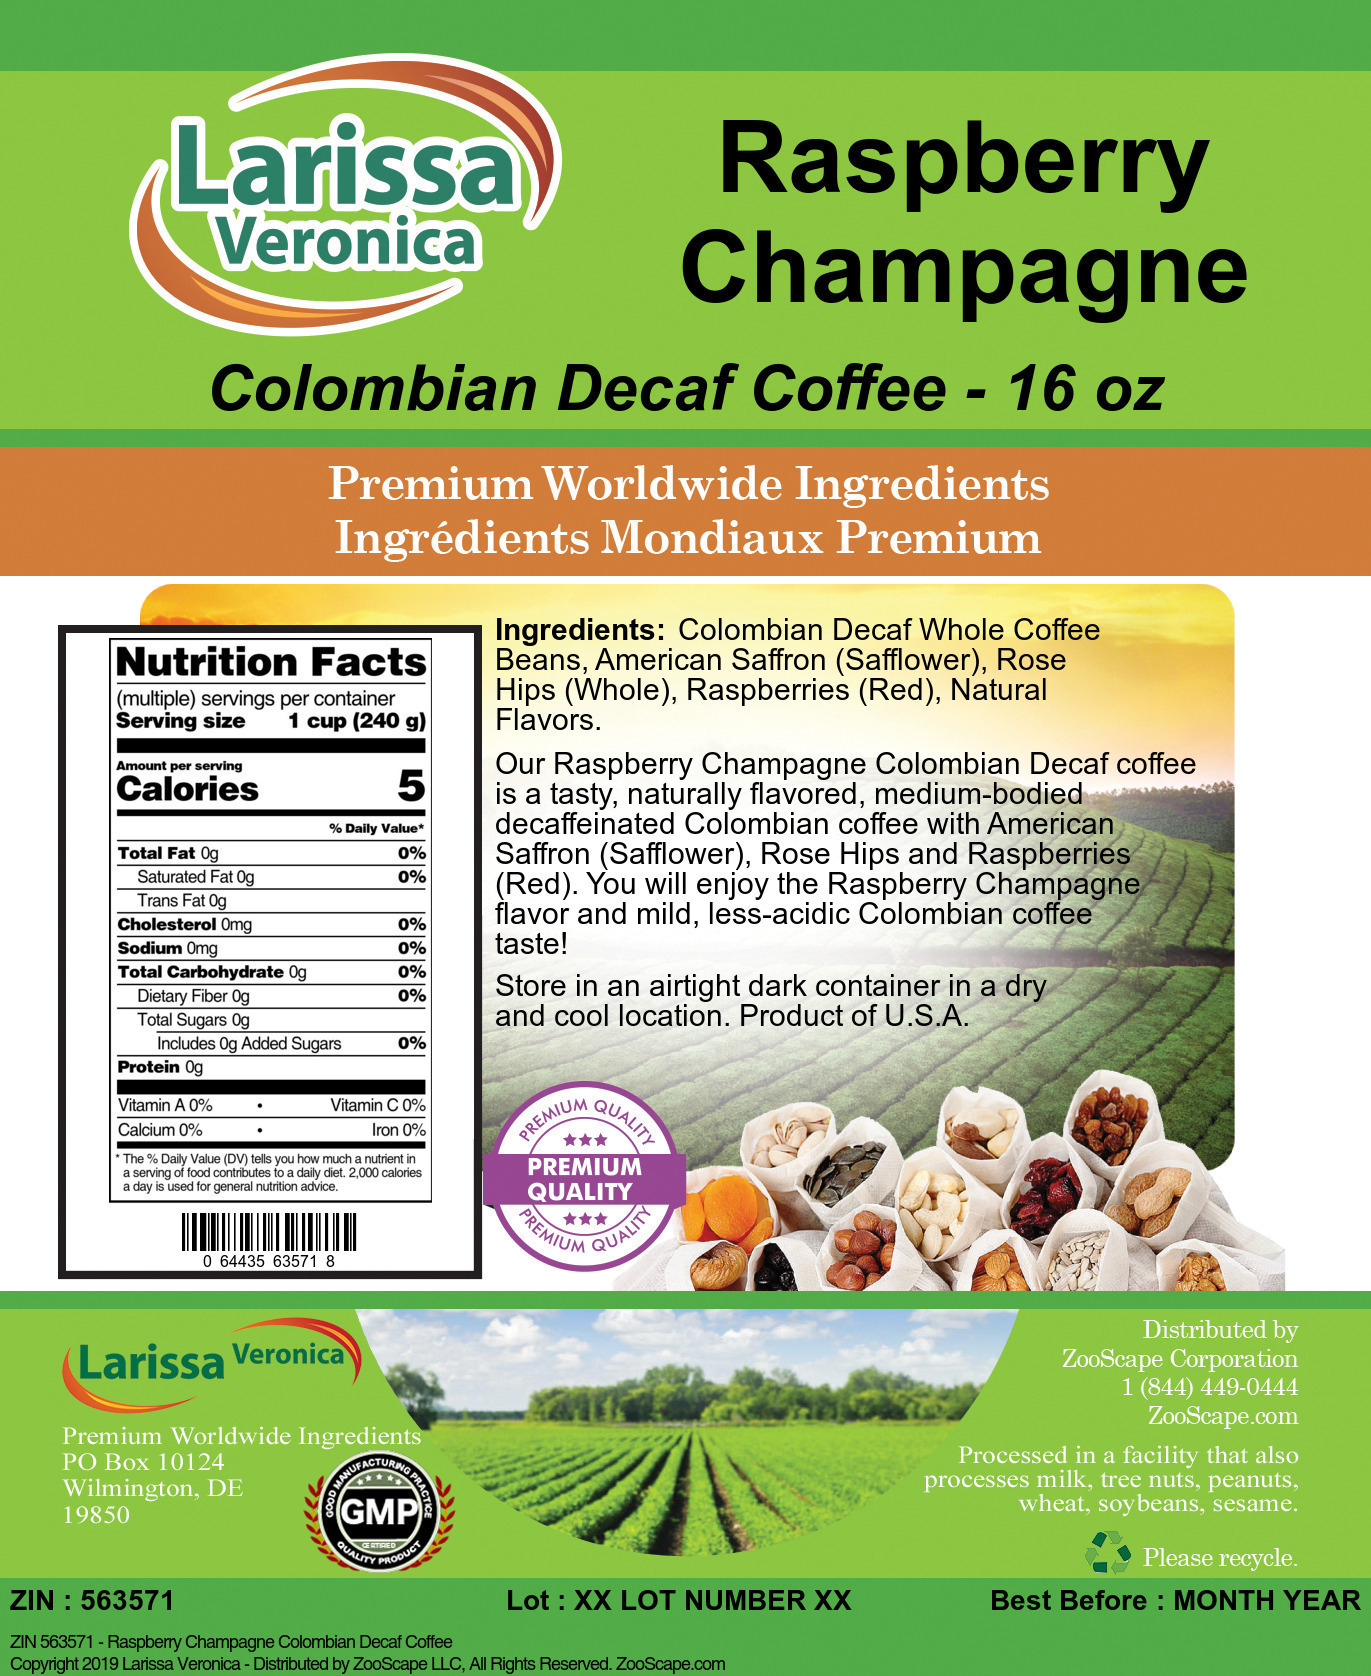 Raspberry Champagne Colombian Decaf Coffee - Label